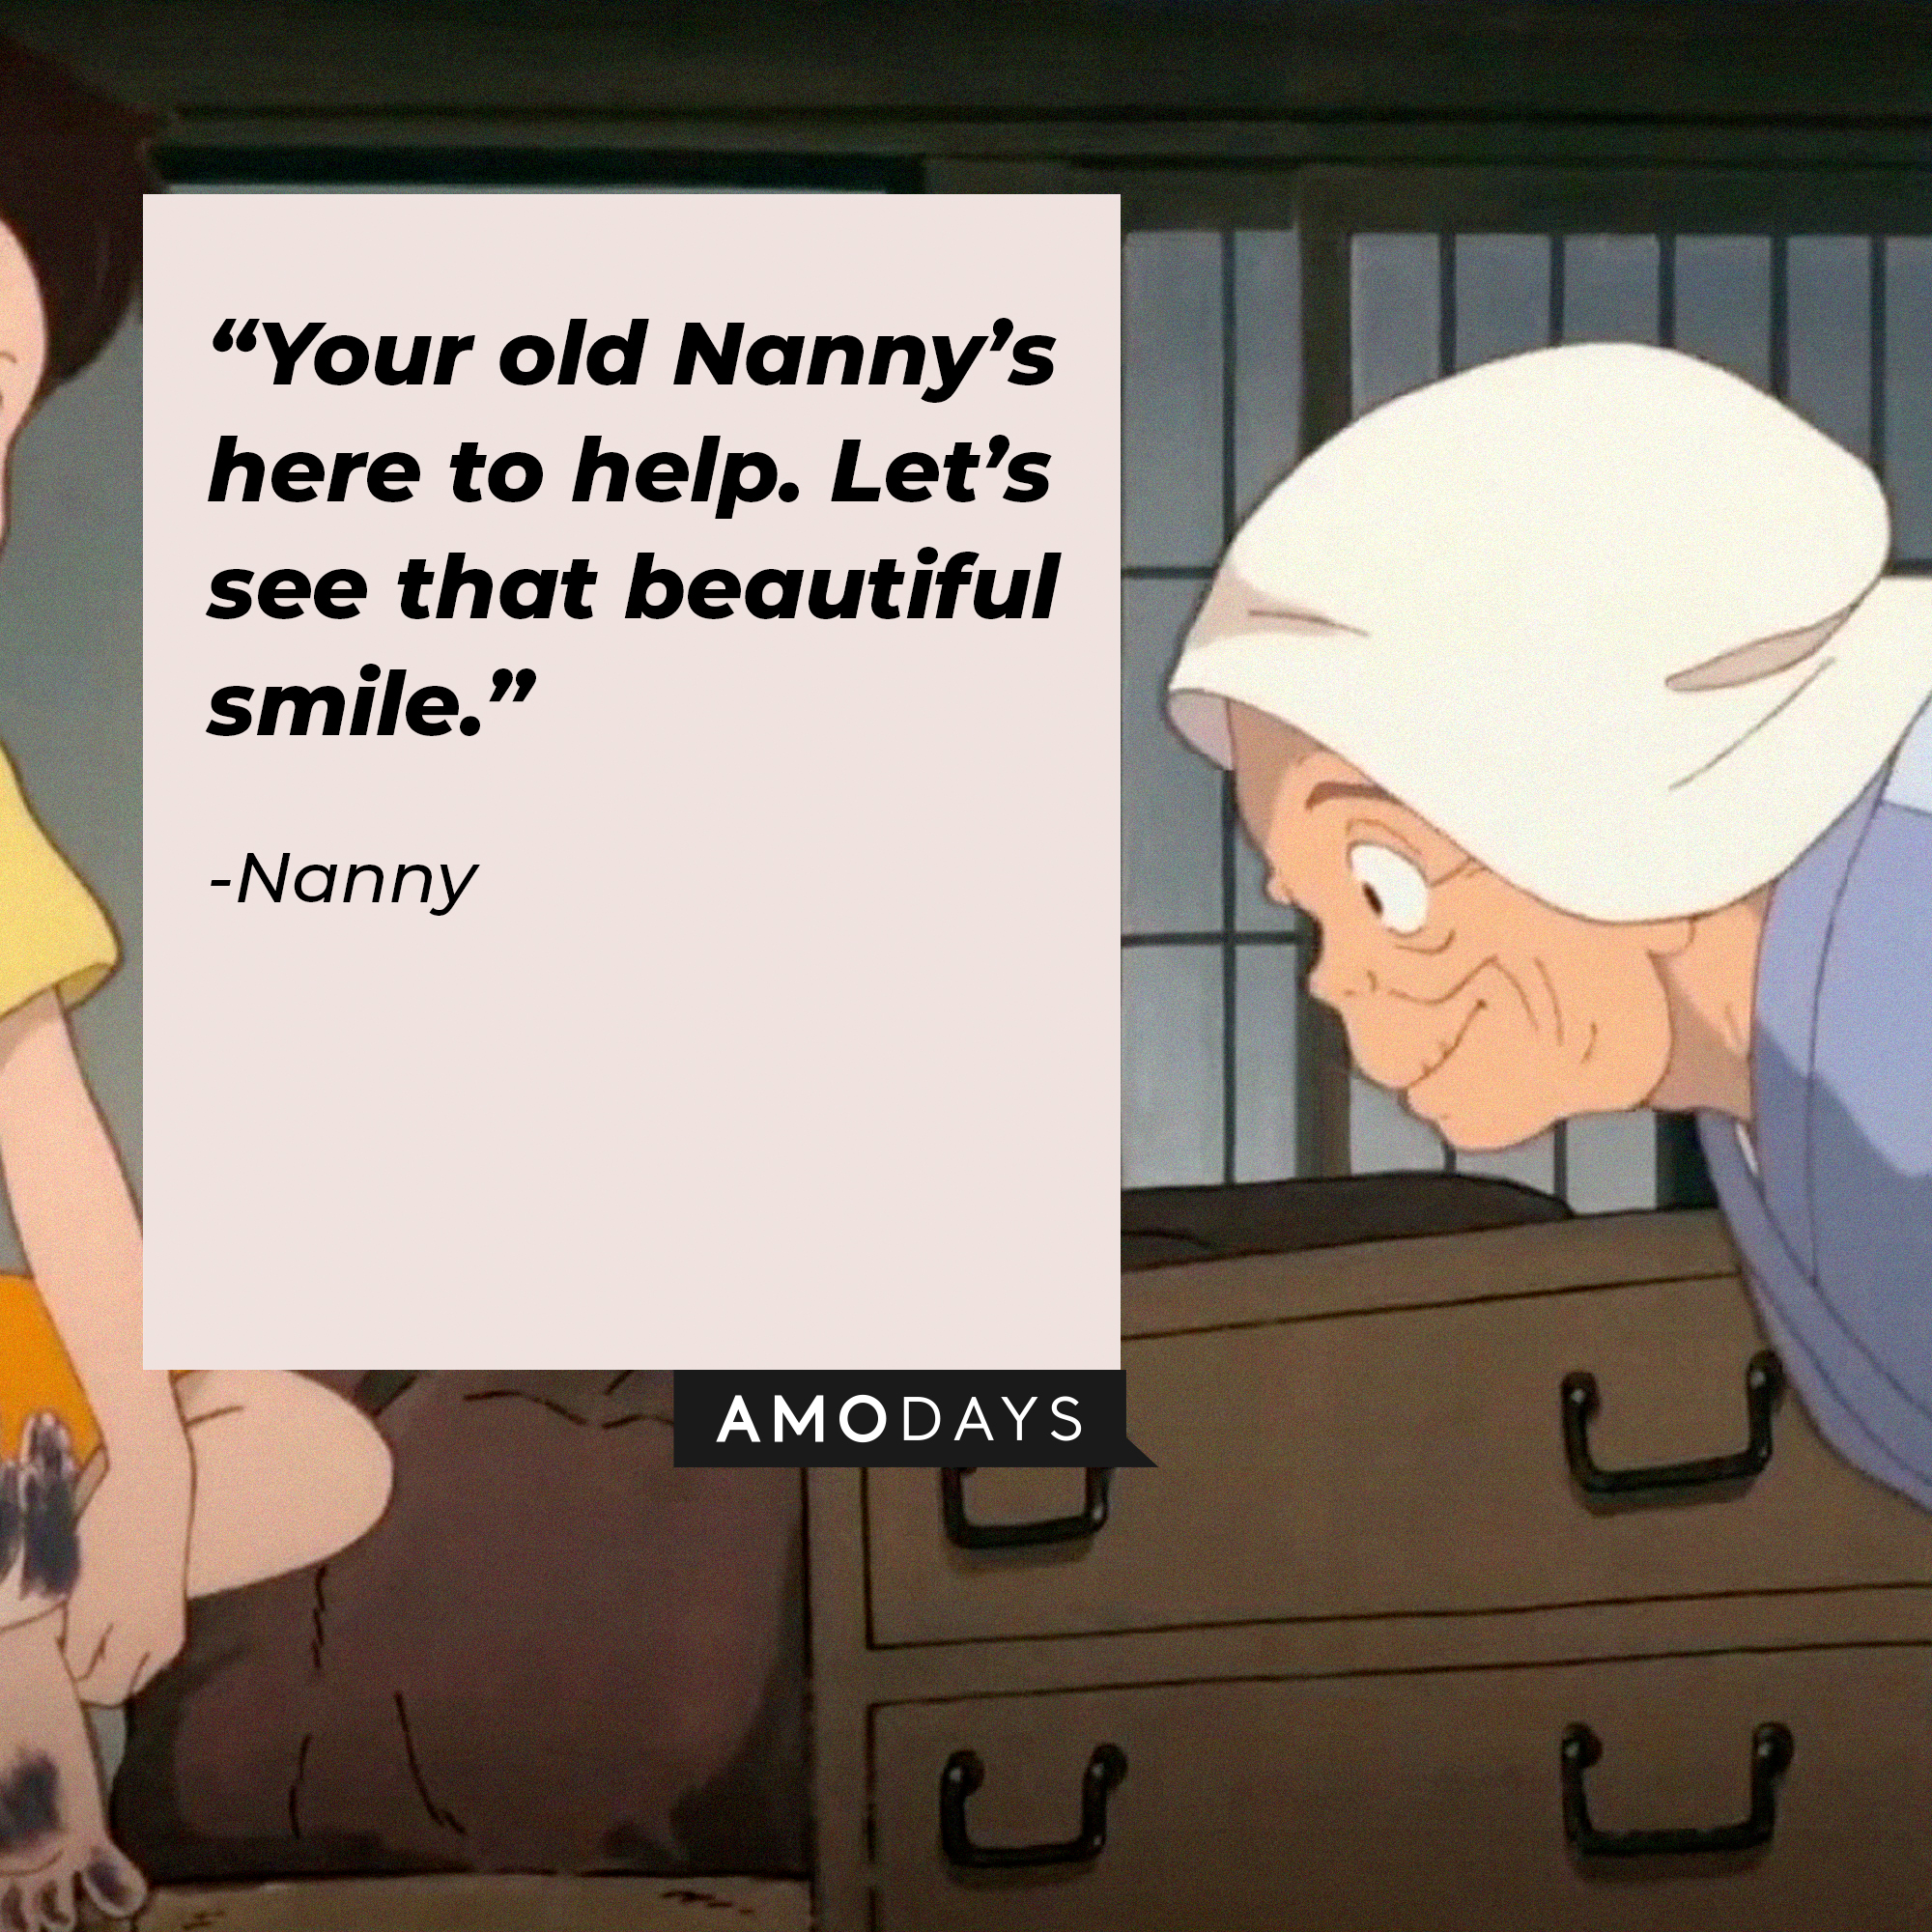 An image of Nanny with her quote: “Your old Nanny’s here to help. Let’s see that beautiful smile.” | Source: facebook.com/GhibliUSA